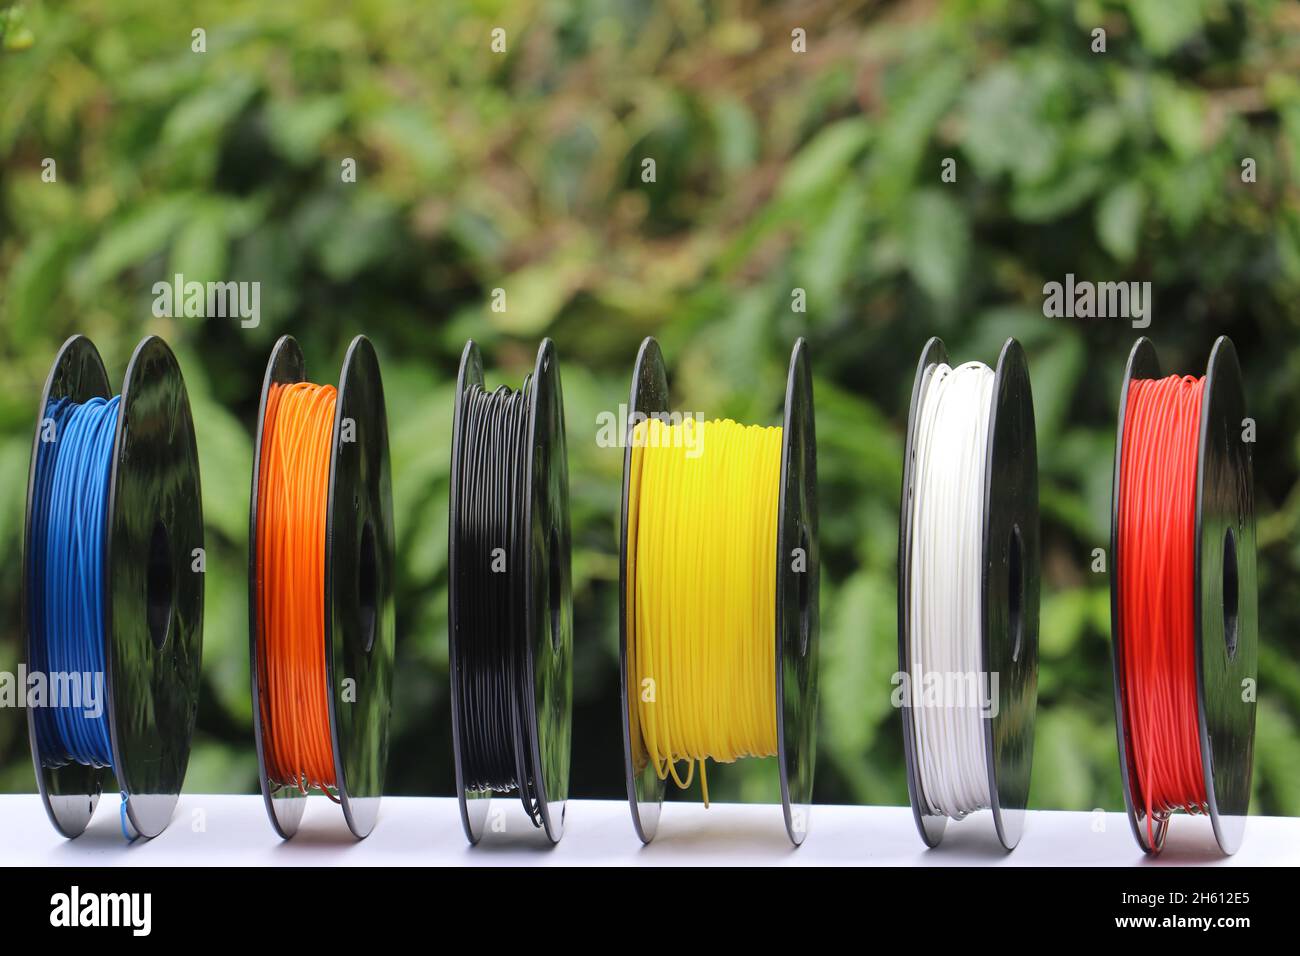 3D printer filaments on a spool isolated on a nature background show the concept of biodegradable plastic that is nature friendly Stock Photo